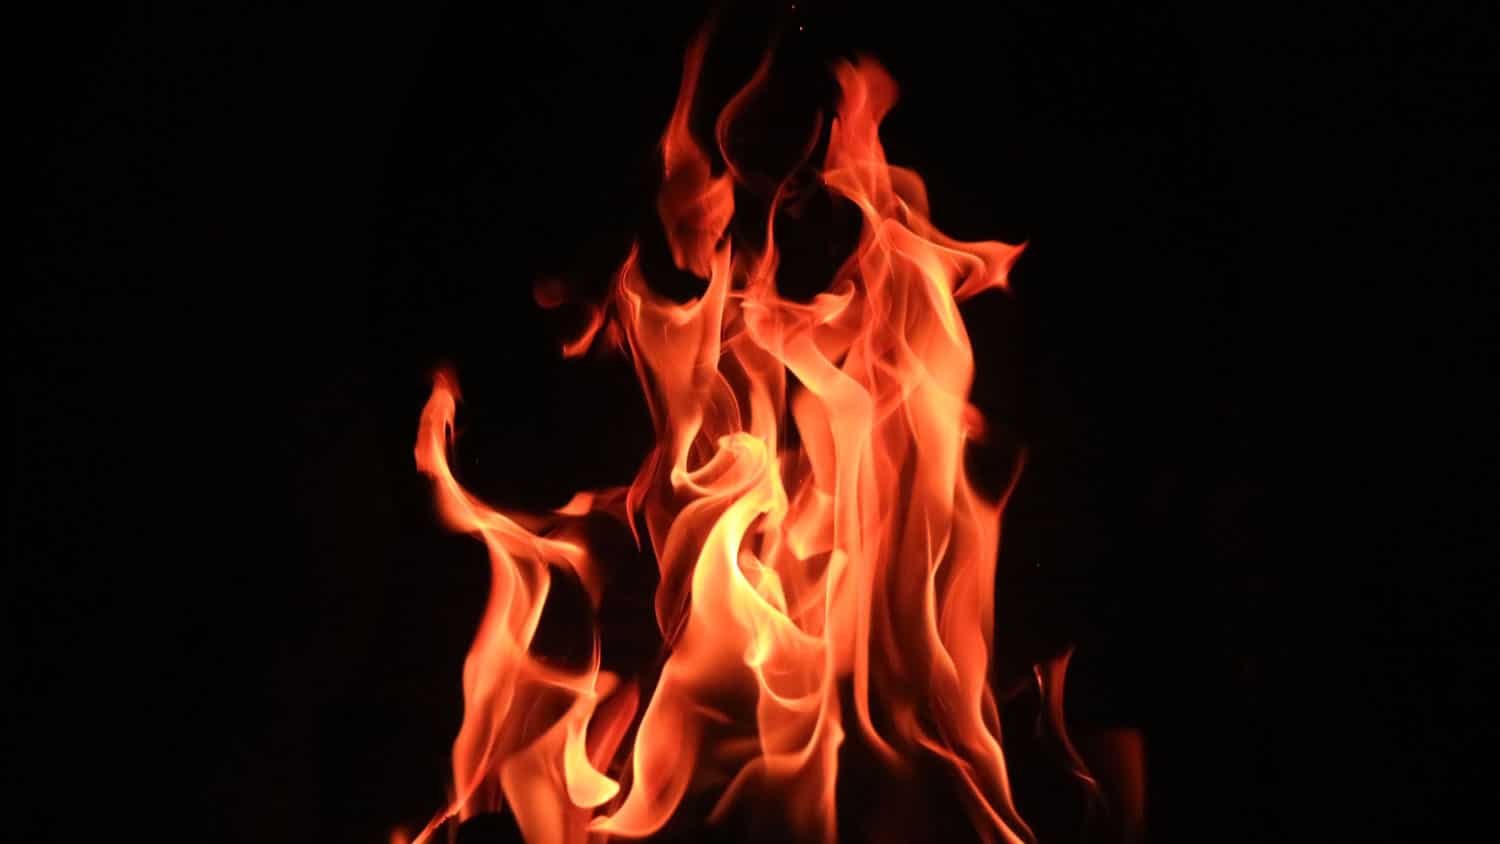 photo shows flames in front of a black backdrop